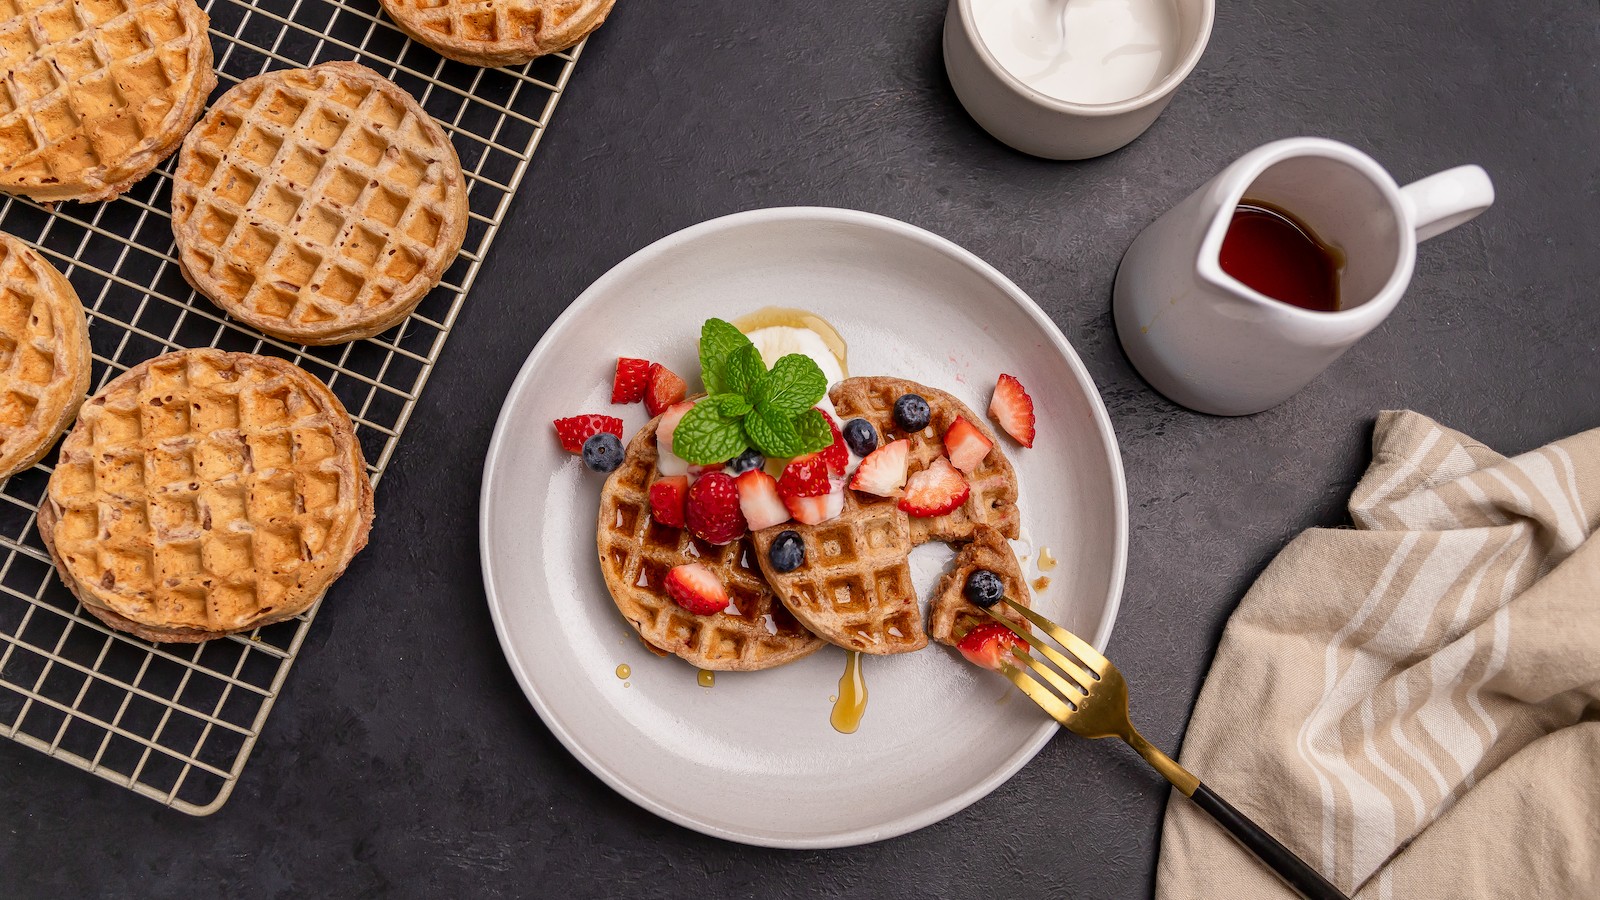 Image of Berry Pancakes and Waffles